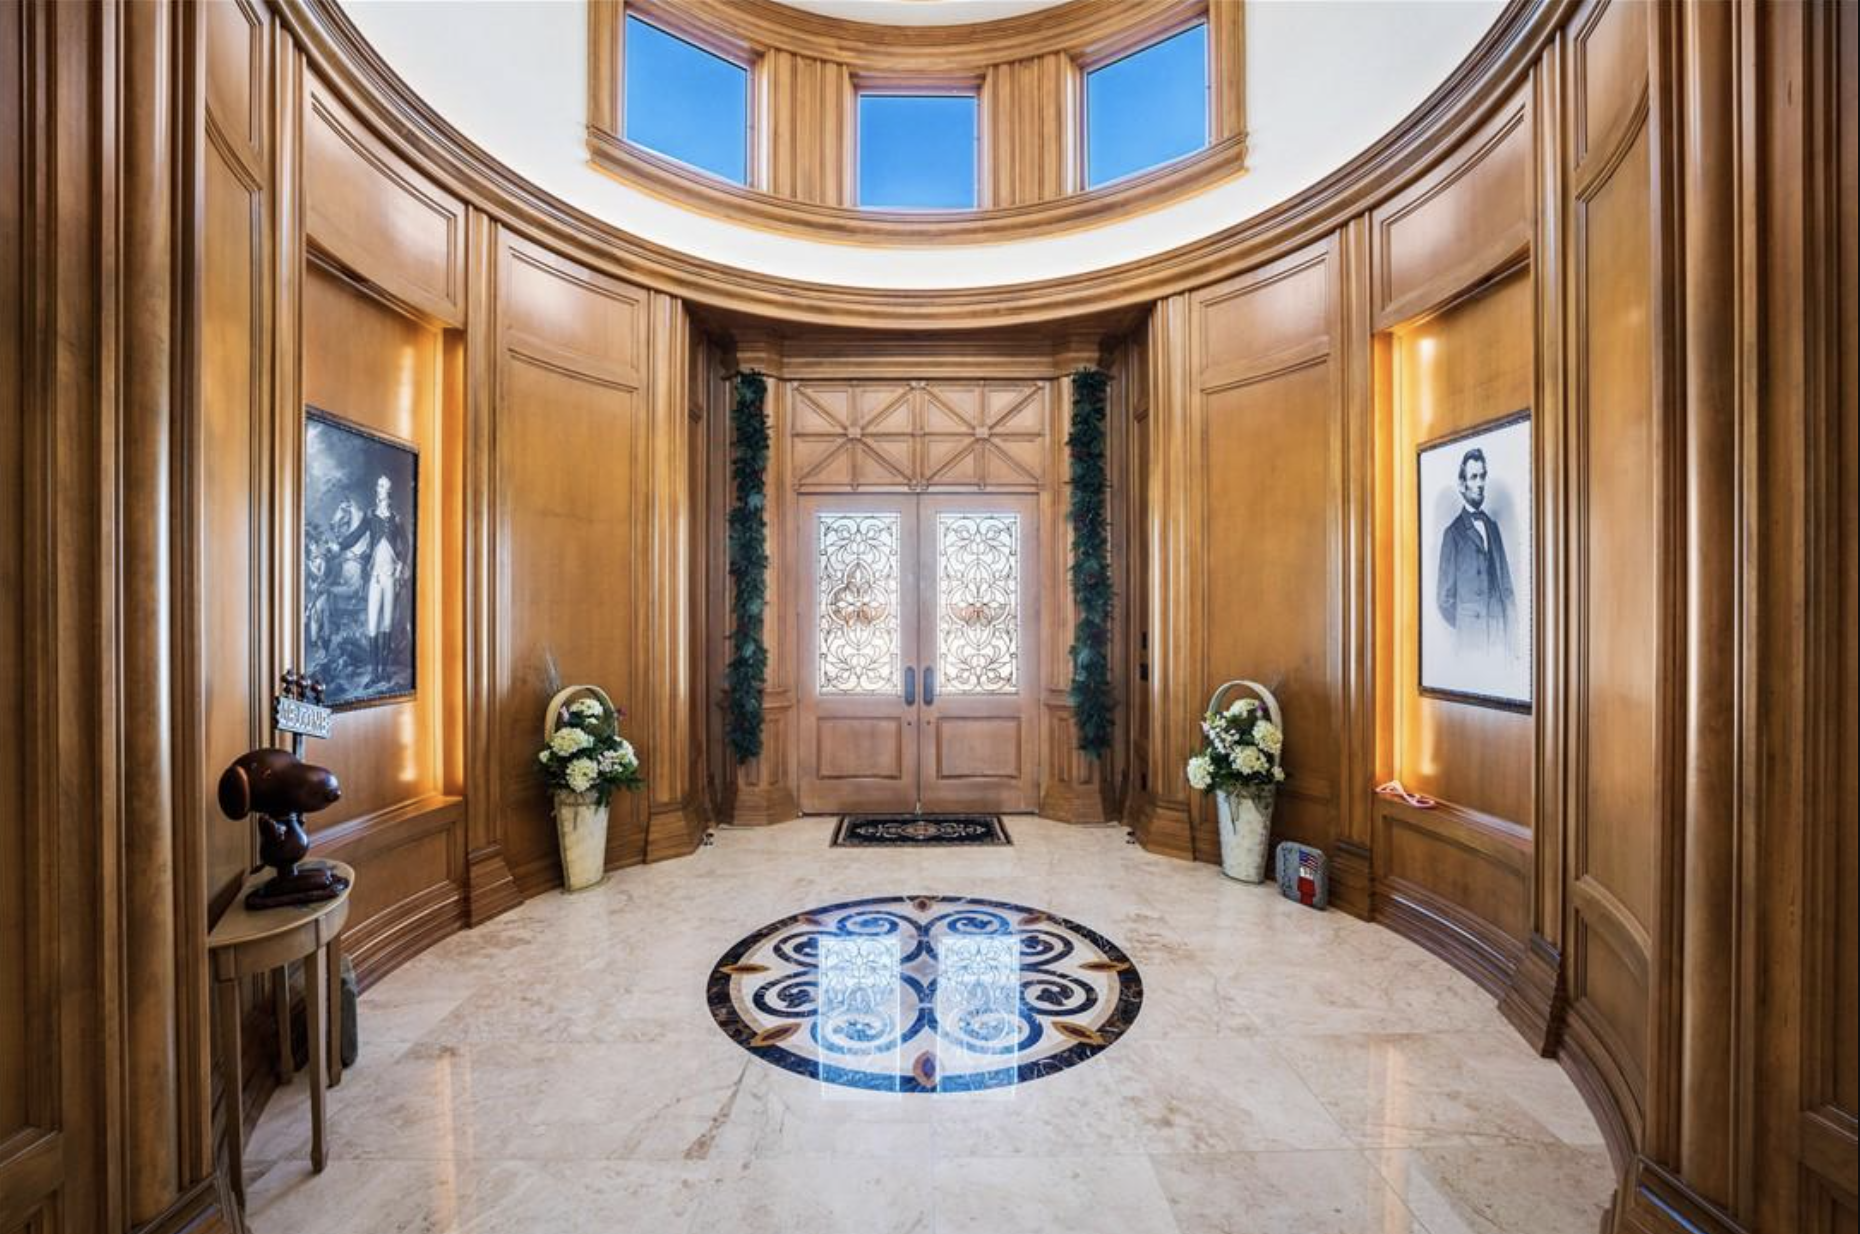 The entryway of 3800 Fuller Road